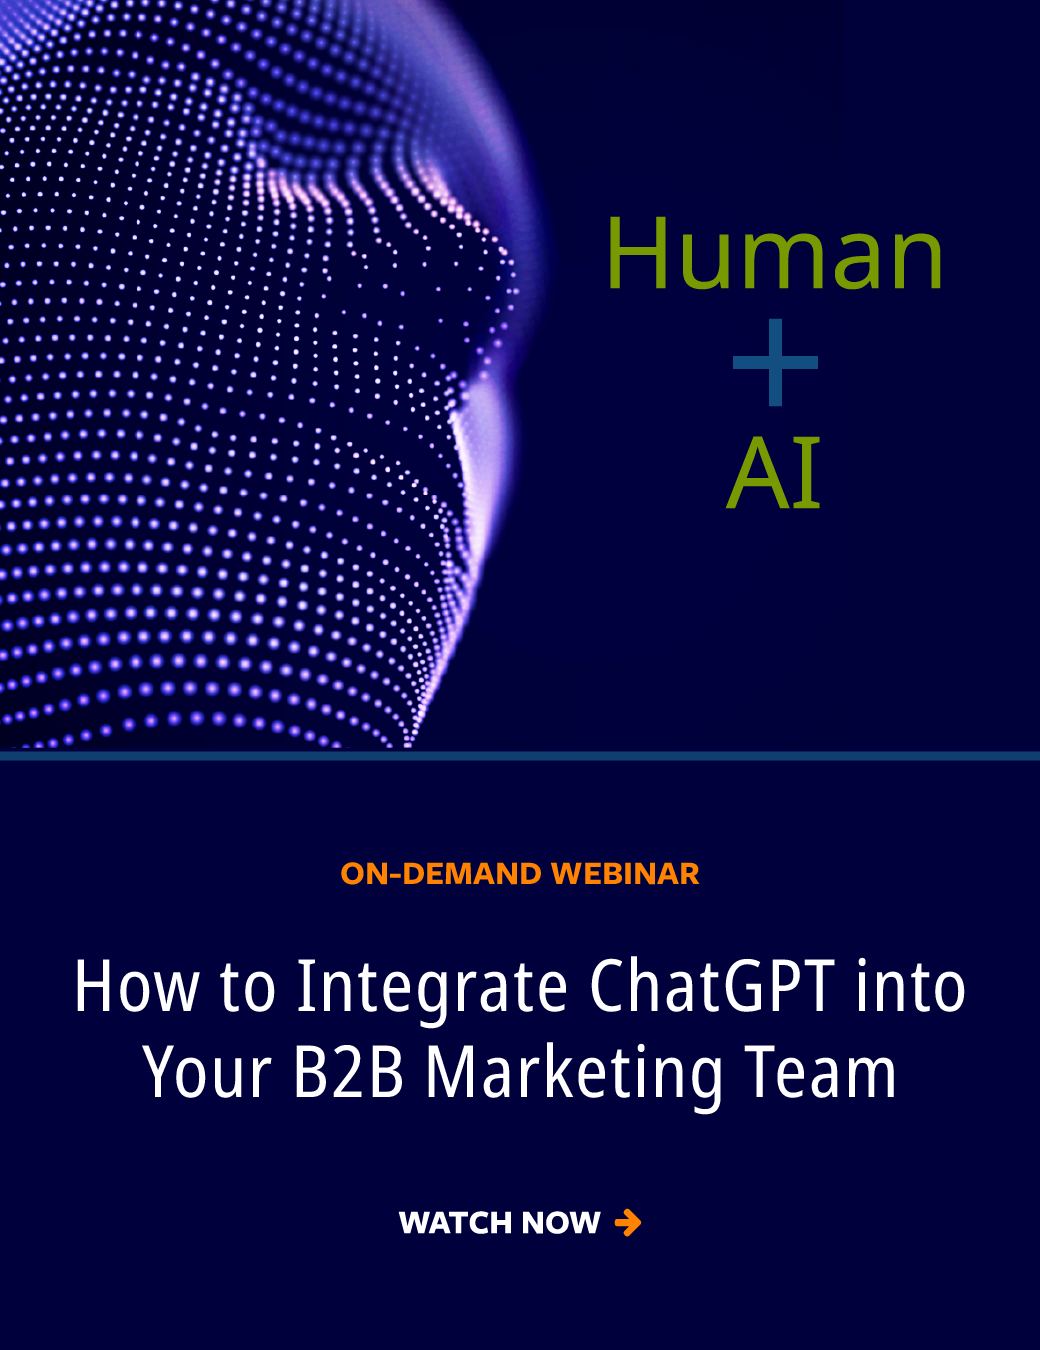 How to integrate ChatGPT into your B2B marketing team